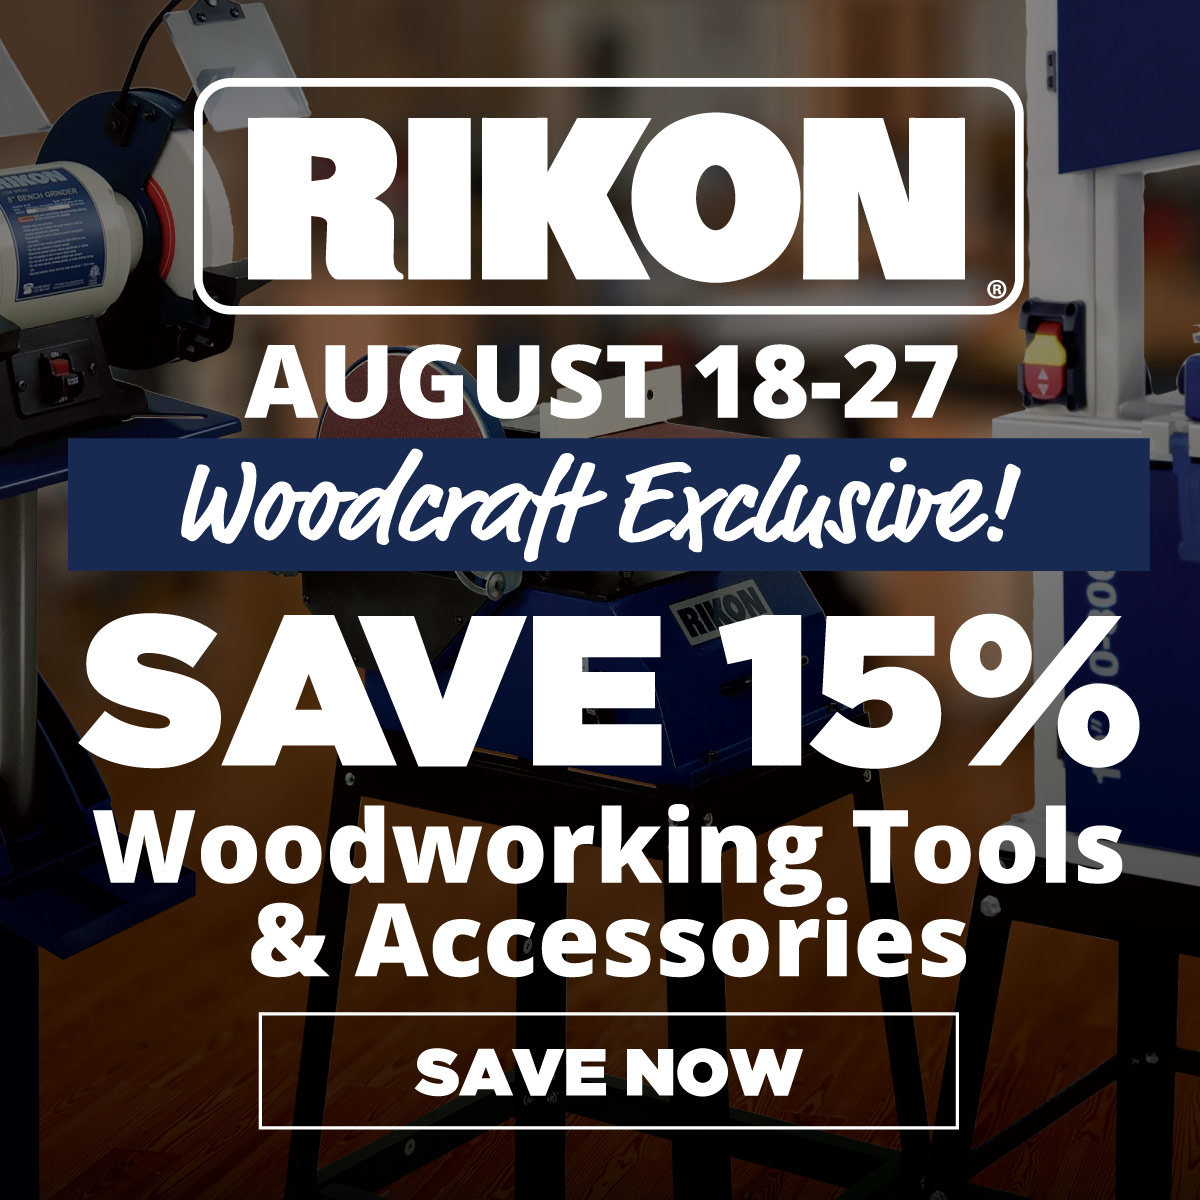 Save 15% Rikon Woodworking Tools & Accessories - Woodcraft Exclusive! August 18-27